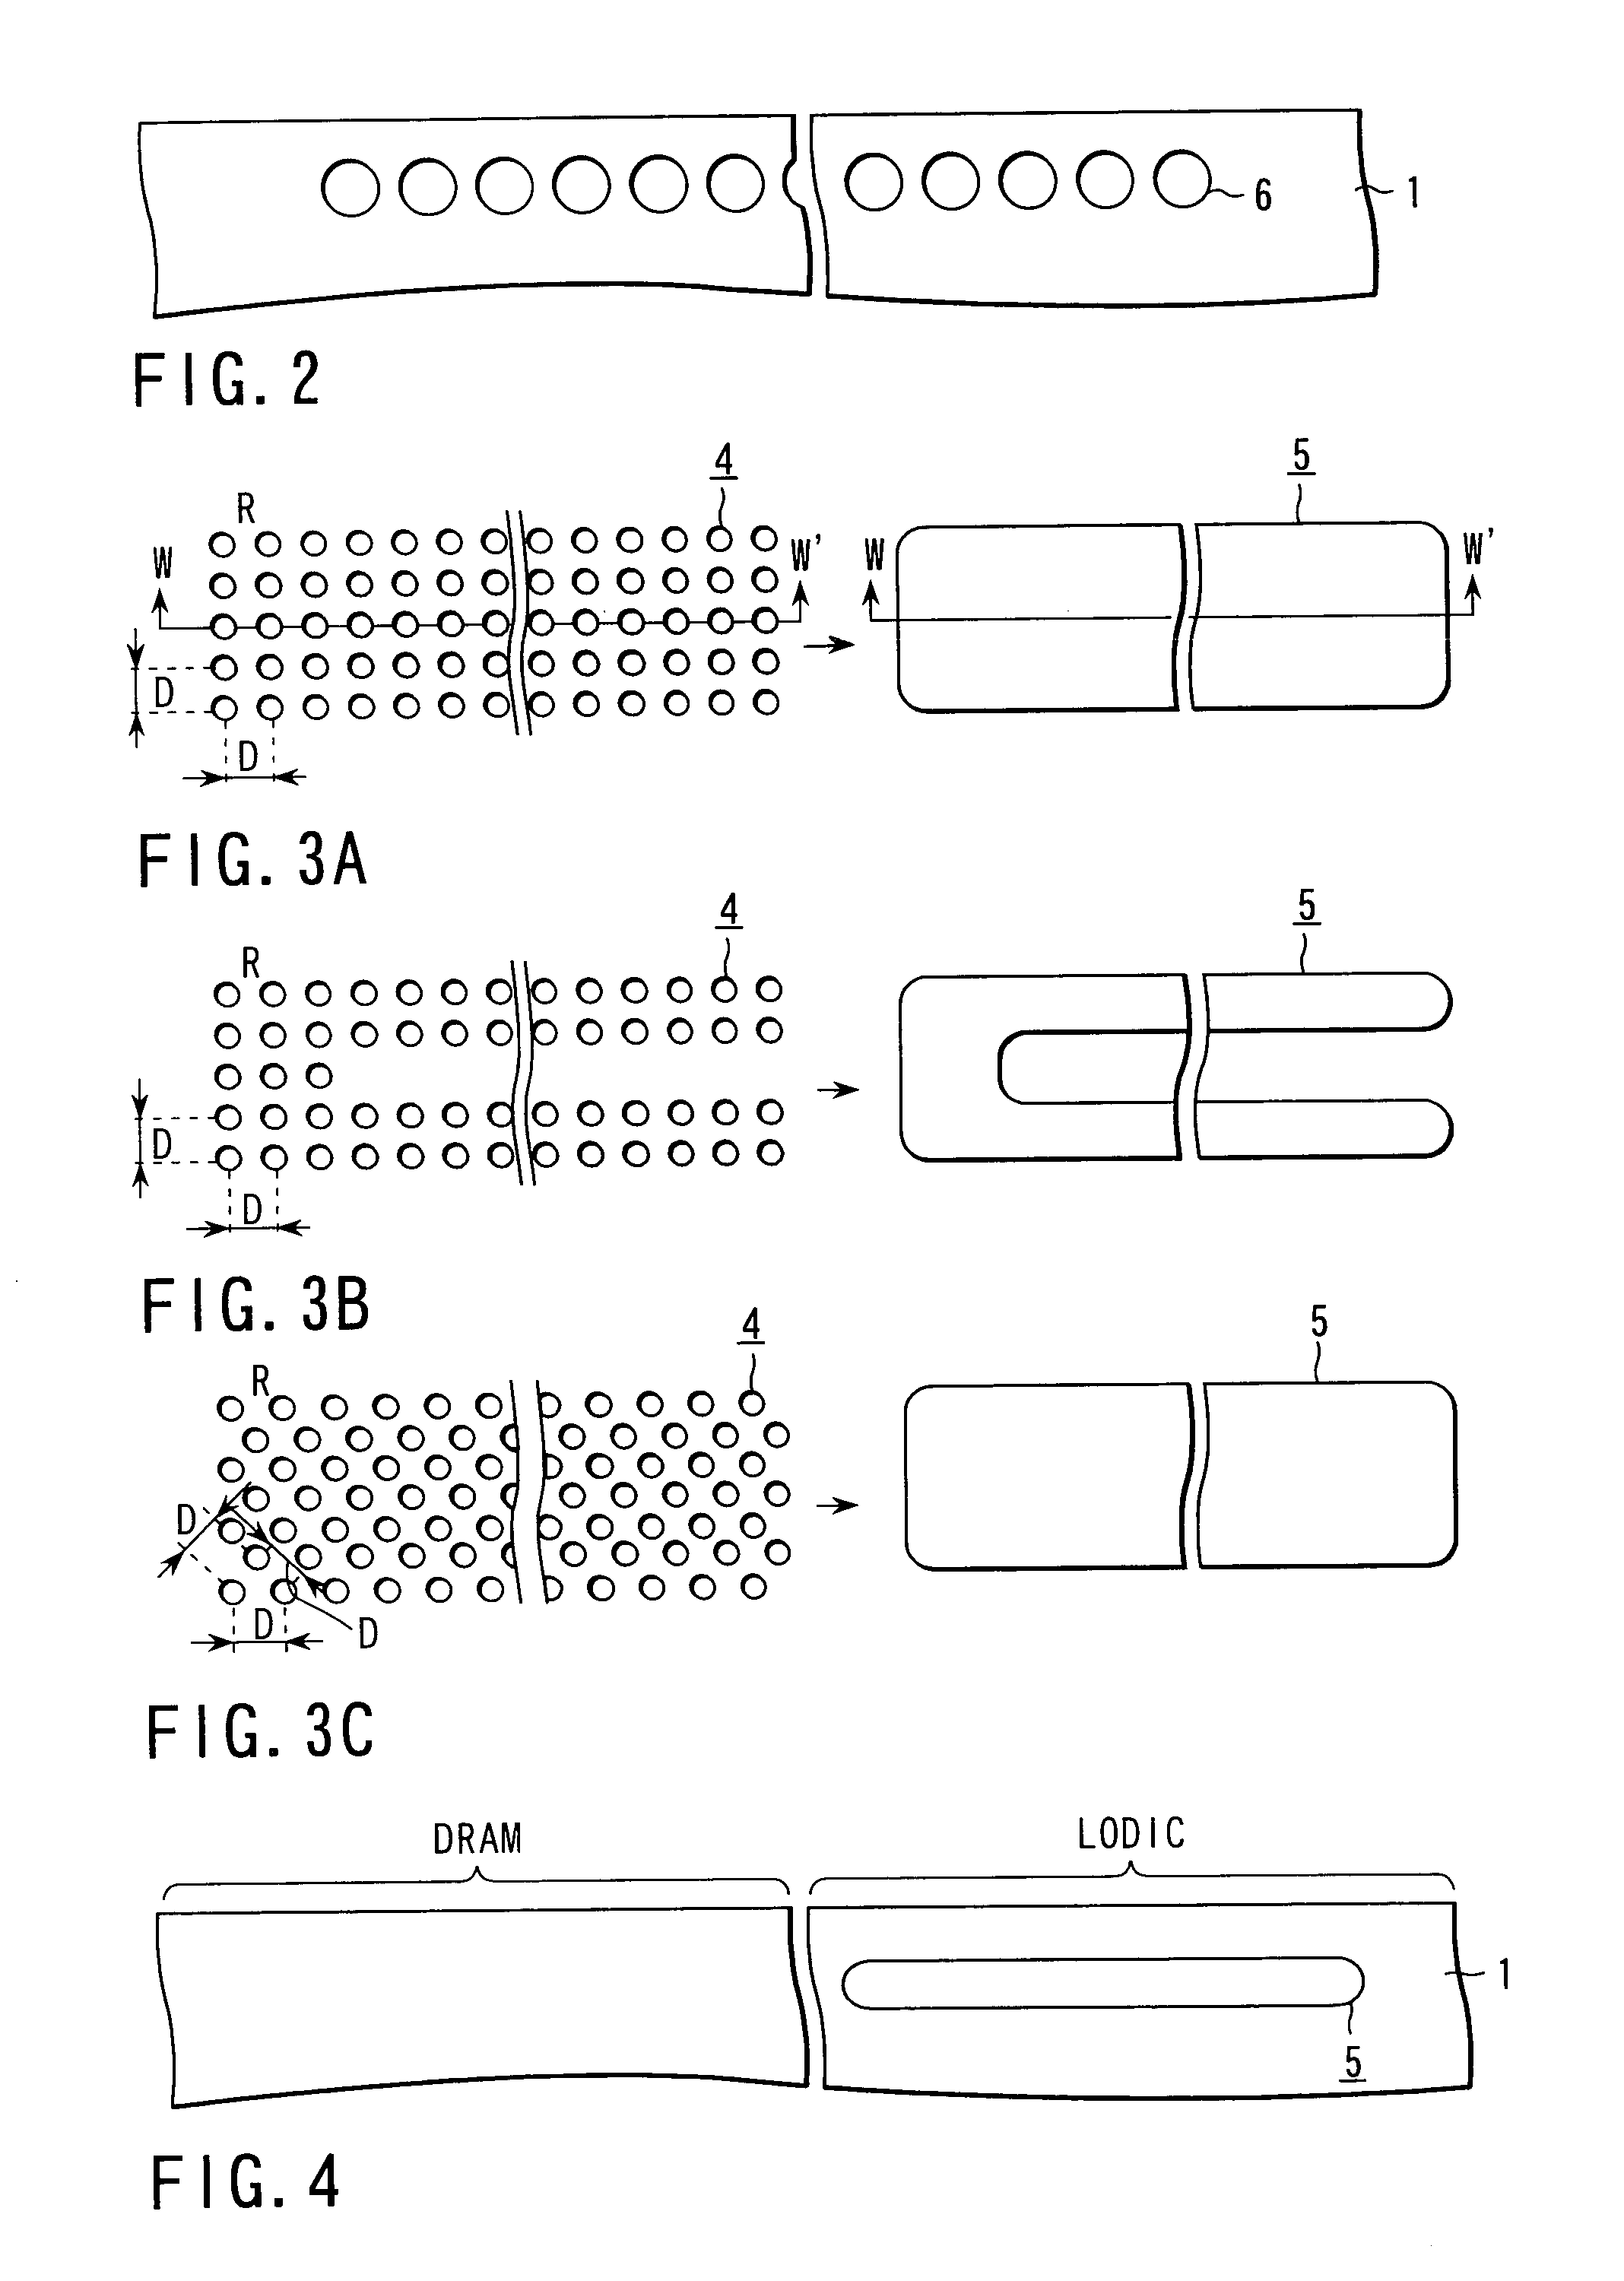 Semiconductor substrate having pillars within a closed empty space